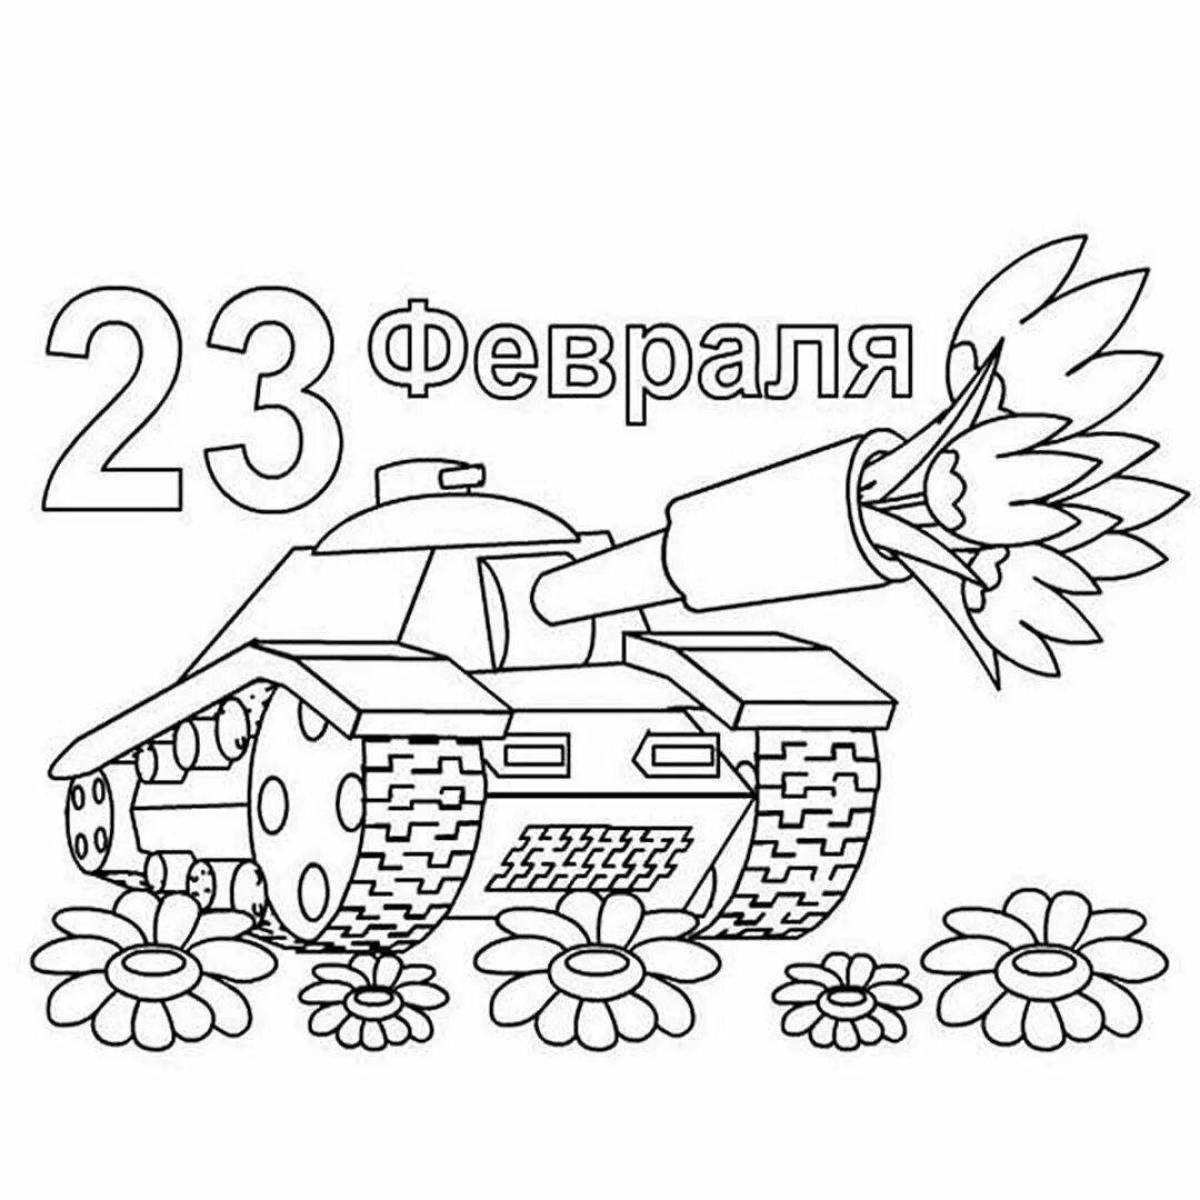 Fun 23 February coloring book for babies